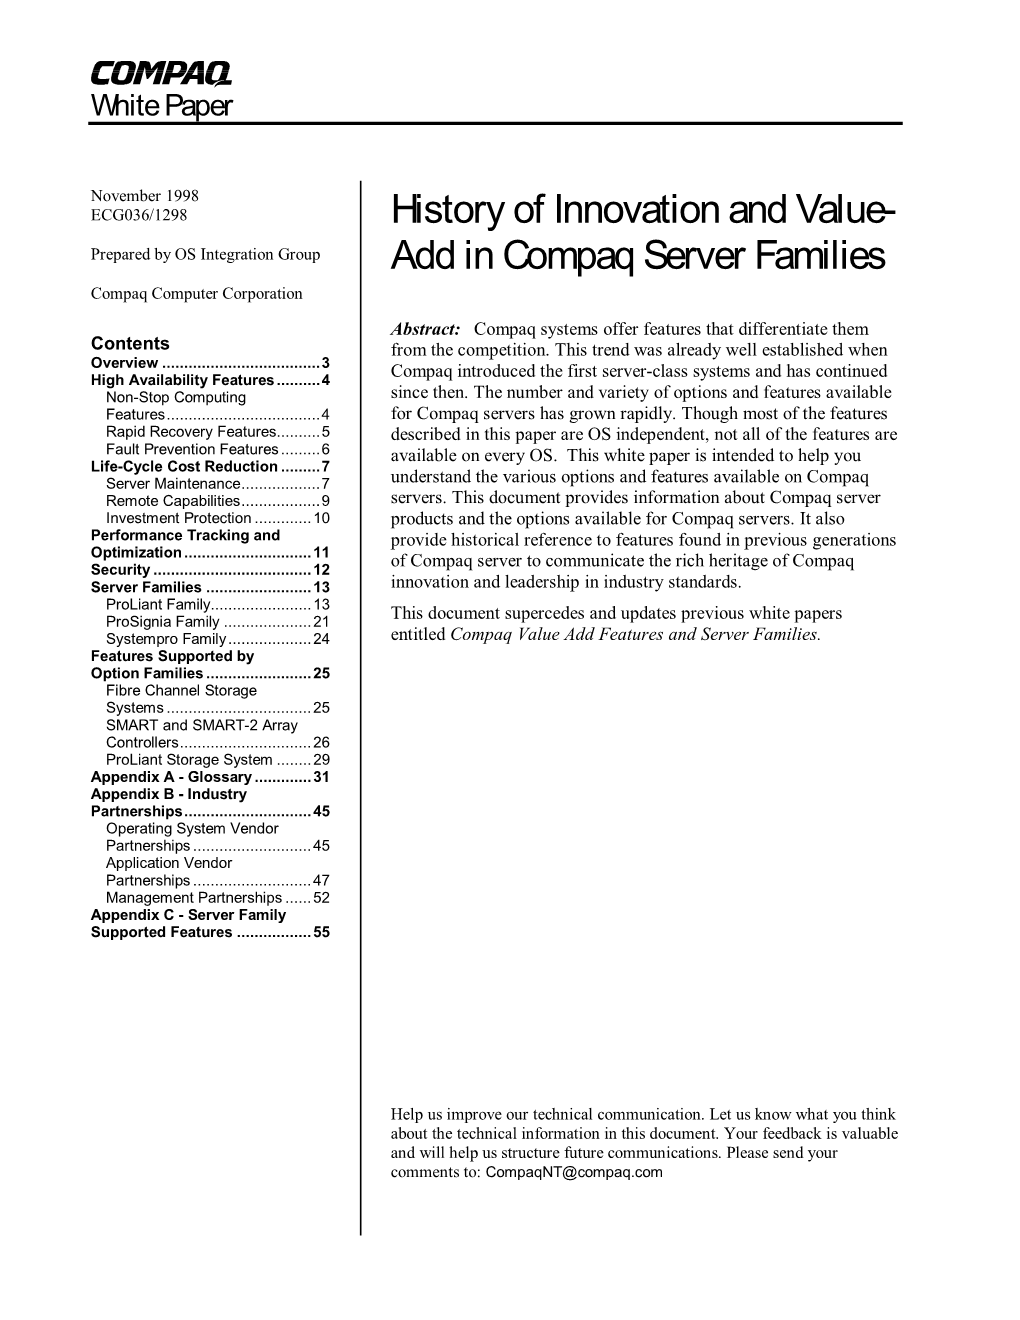 History of Innovation and Value- Add in Compaq Server Families